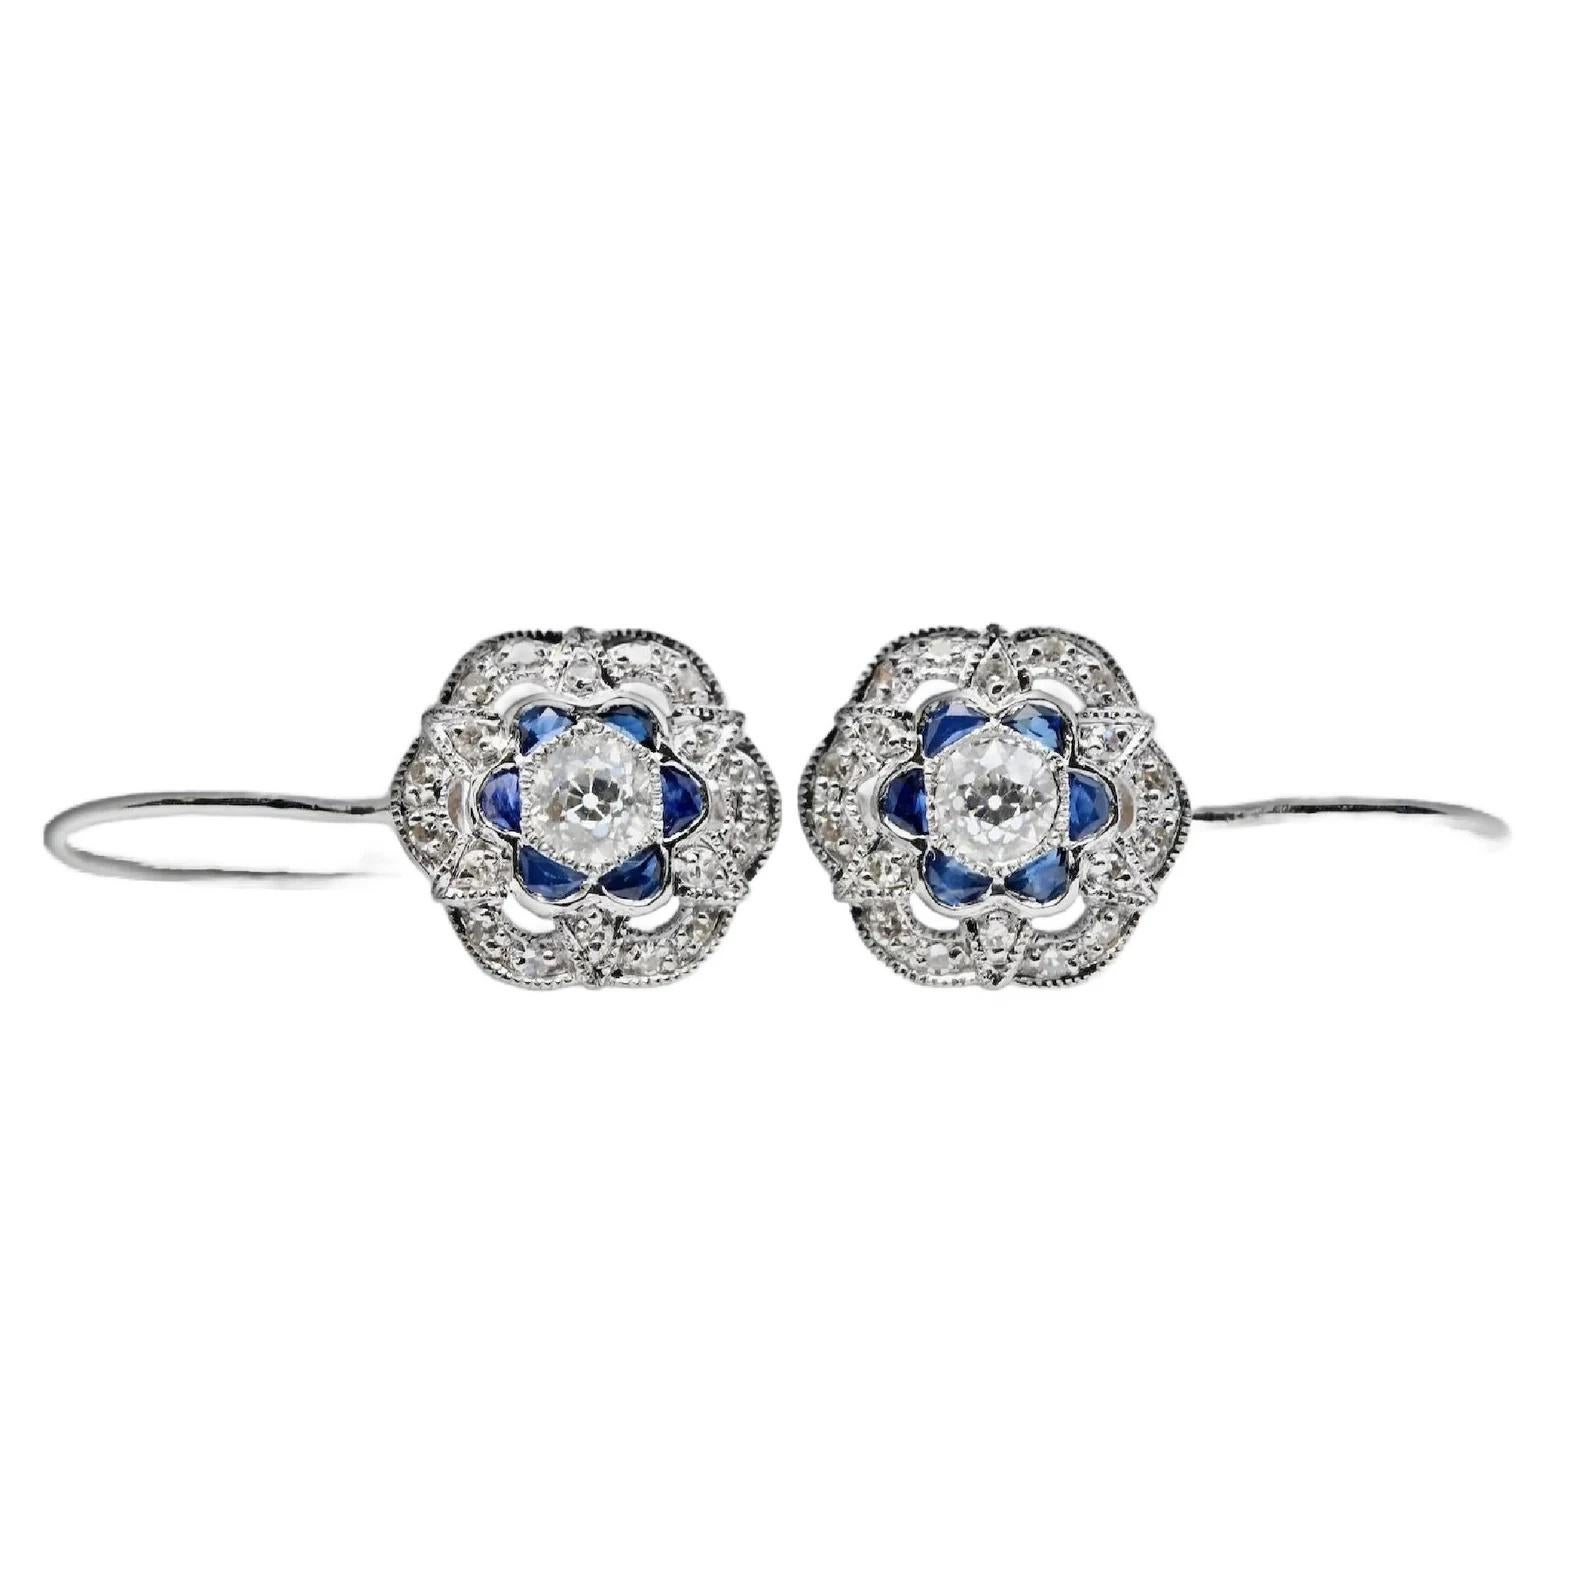 A pair of handmade Art Deco style diamond and sapphire earrings. Crafted in 14 karat white gold these earrings are centered by old European cut diamonds. Framing the center diamonds are custom half moon cut sapphires and pave set round accent